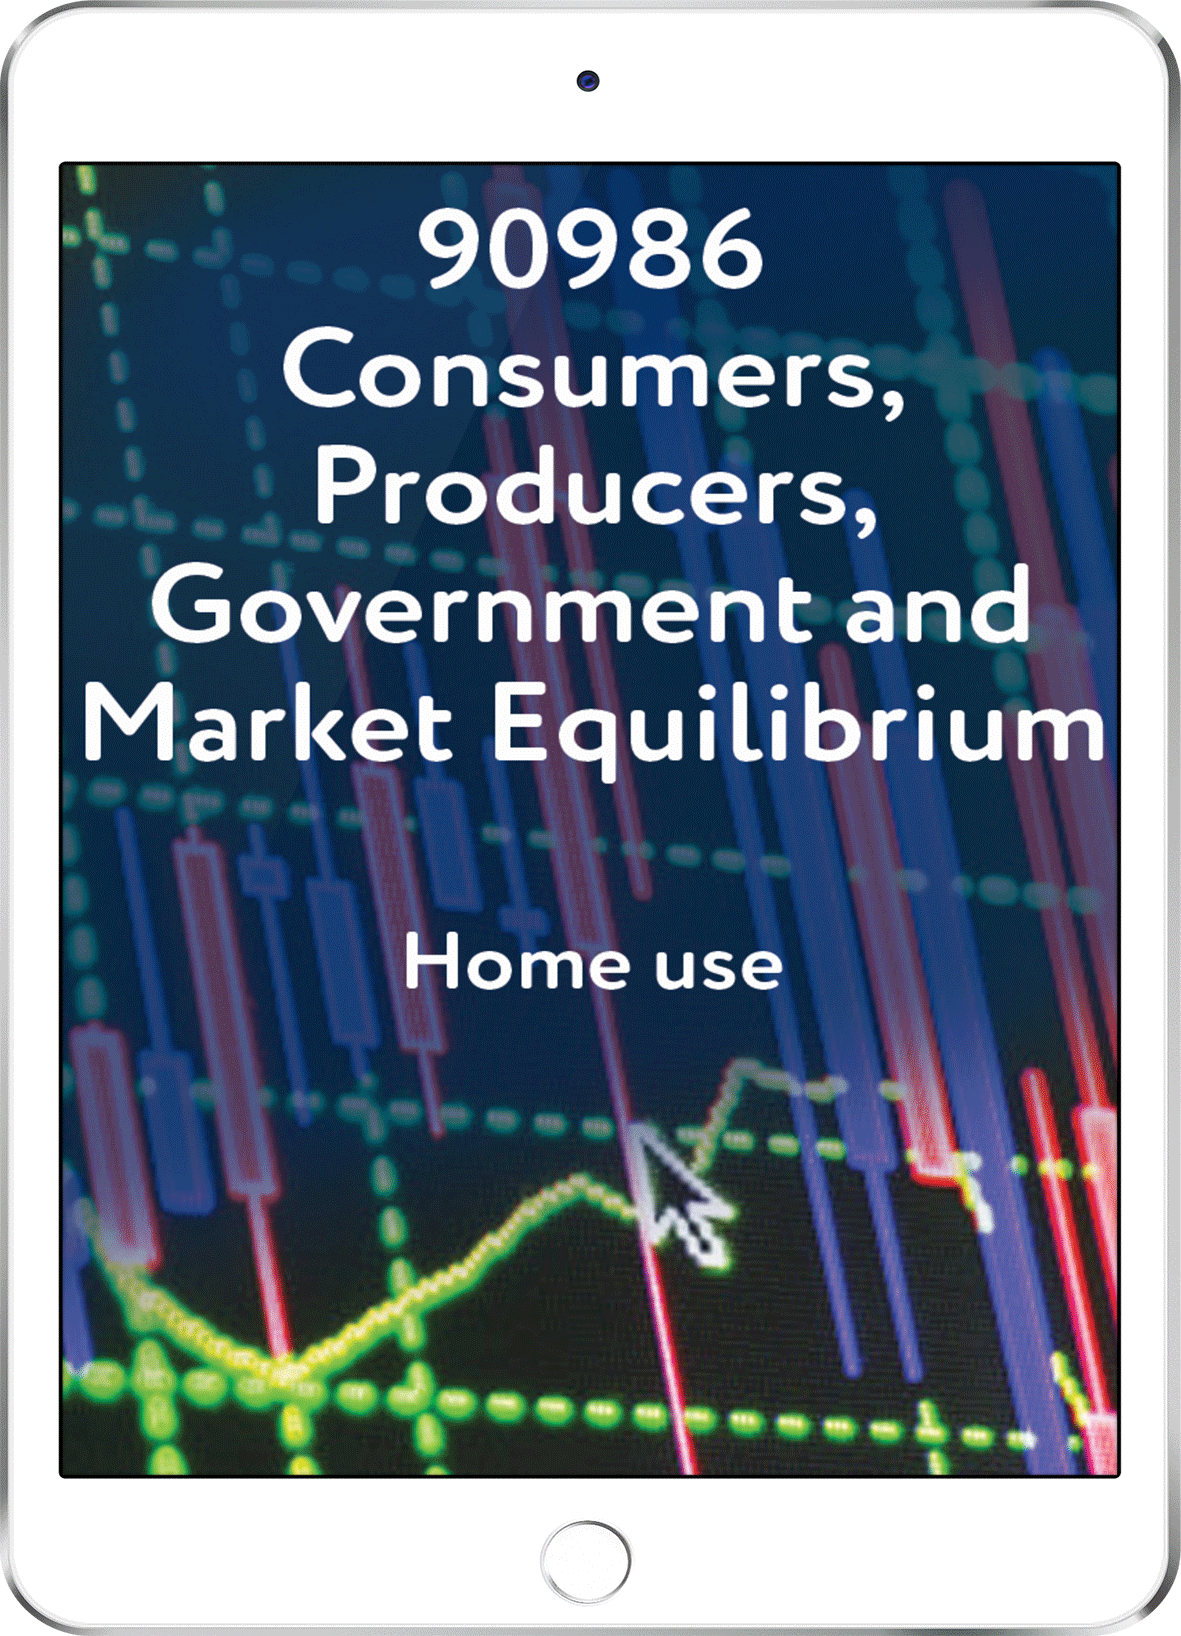 90986 Consumers, Producers, Government and Market Equilibrium - Home Use